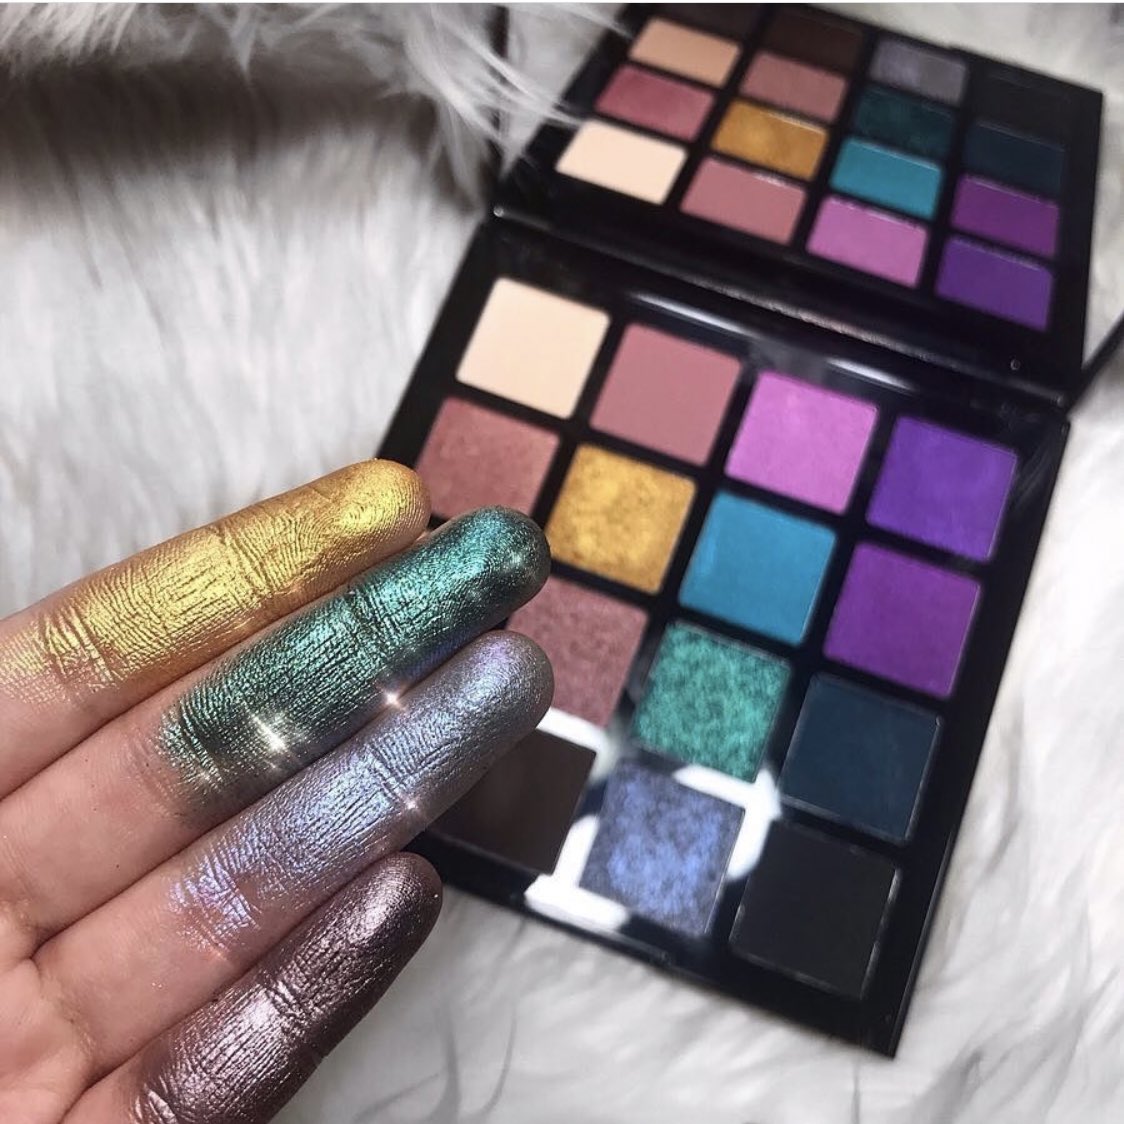 I’m back!These  @lagirlusa haute heat palettes are STUNNING. And even better they’re only $18.Have you EVER seen pigment like this available in the drugstore because I’m floored